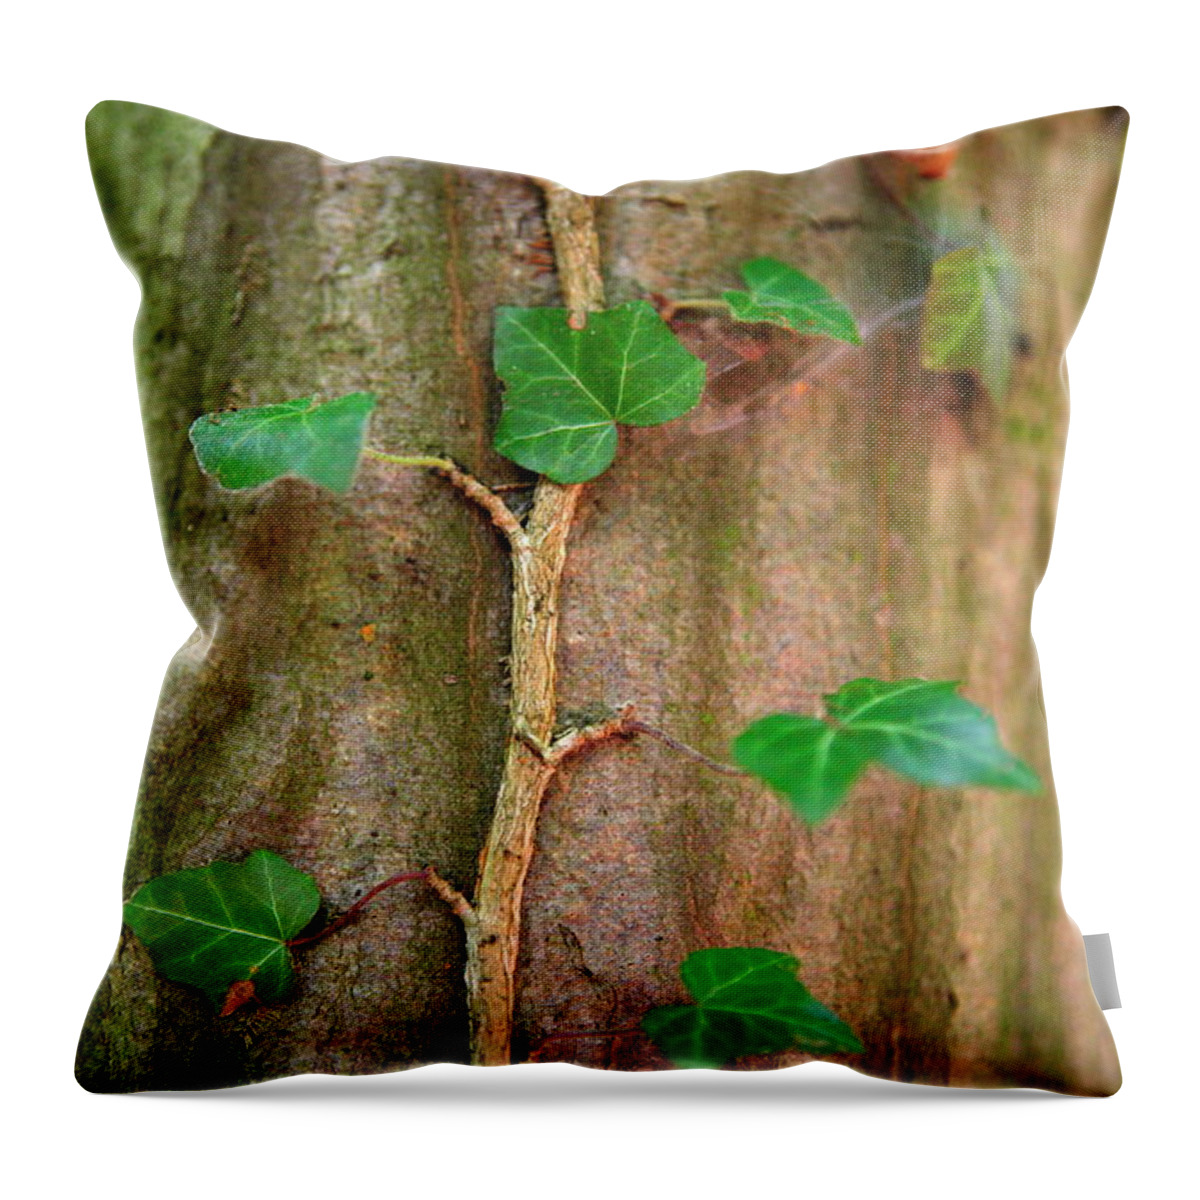 Outdoors Throw Pillow featuring the photograph Ivy Growing On A Tree In Thaya by Franz Marc Frei